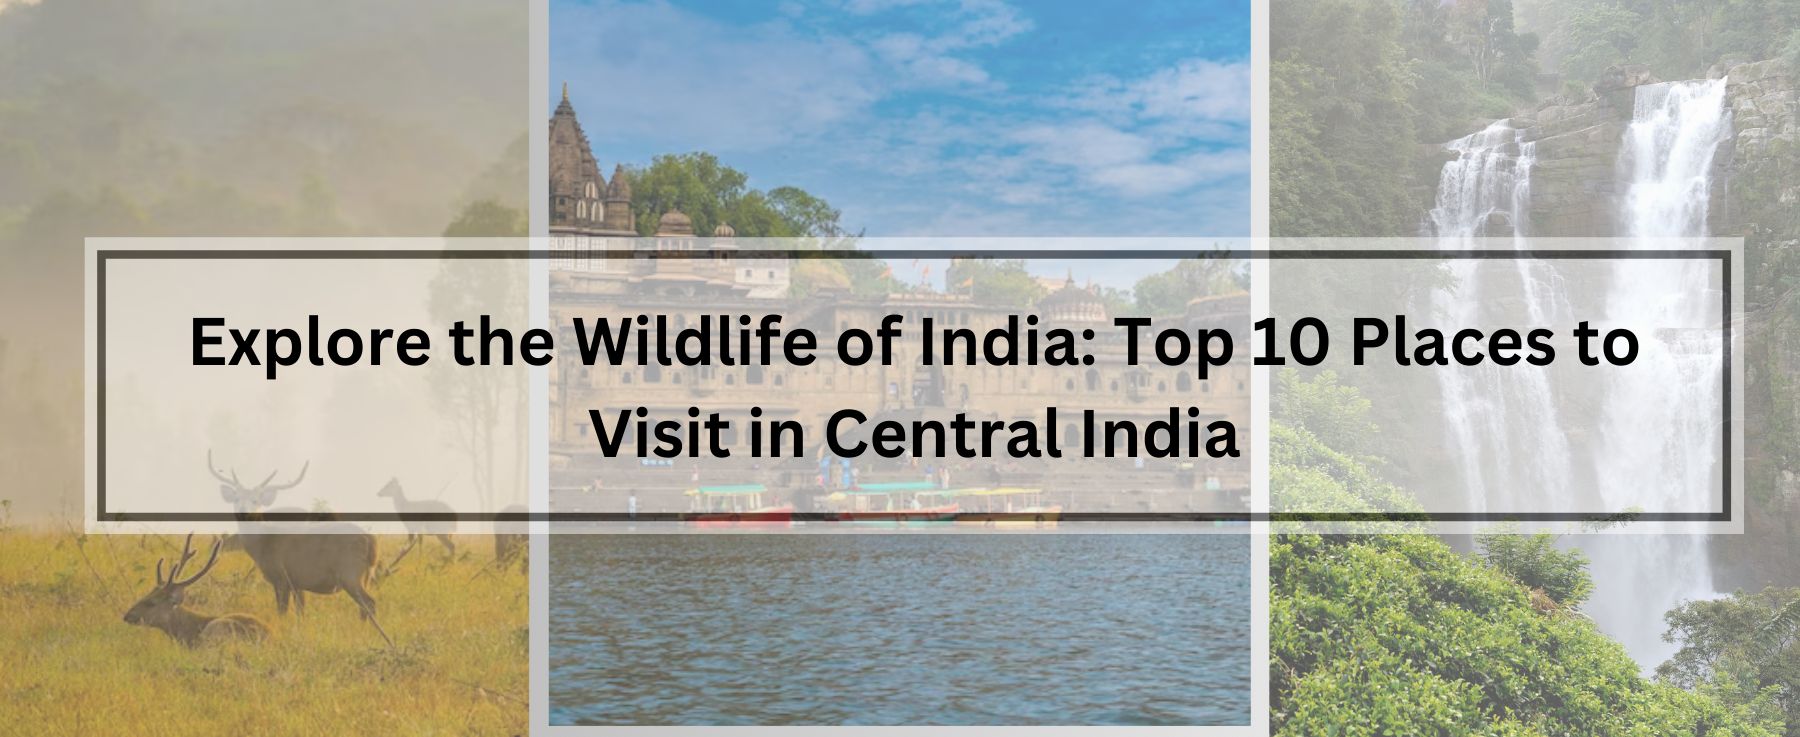 Top 10 Places to Visit in Central India